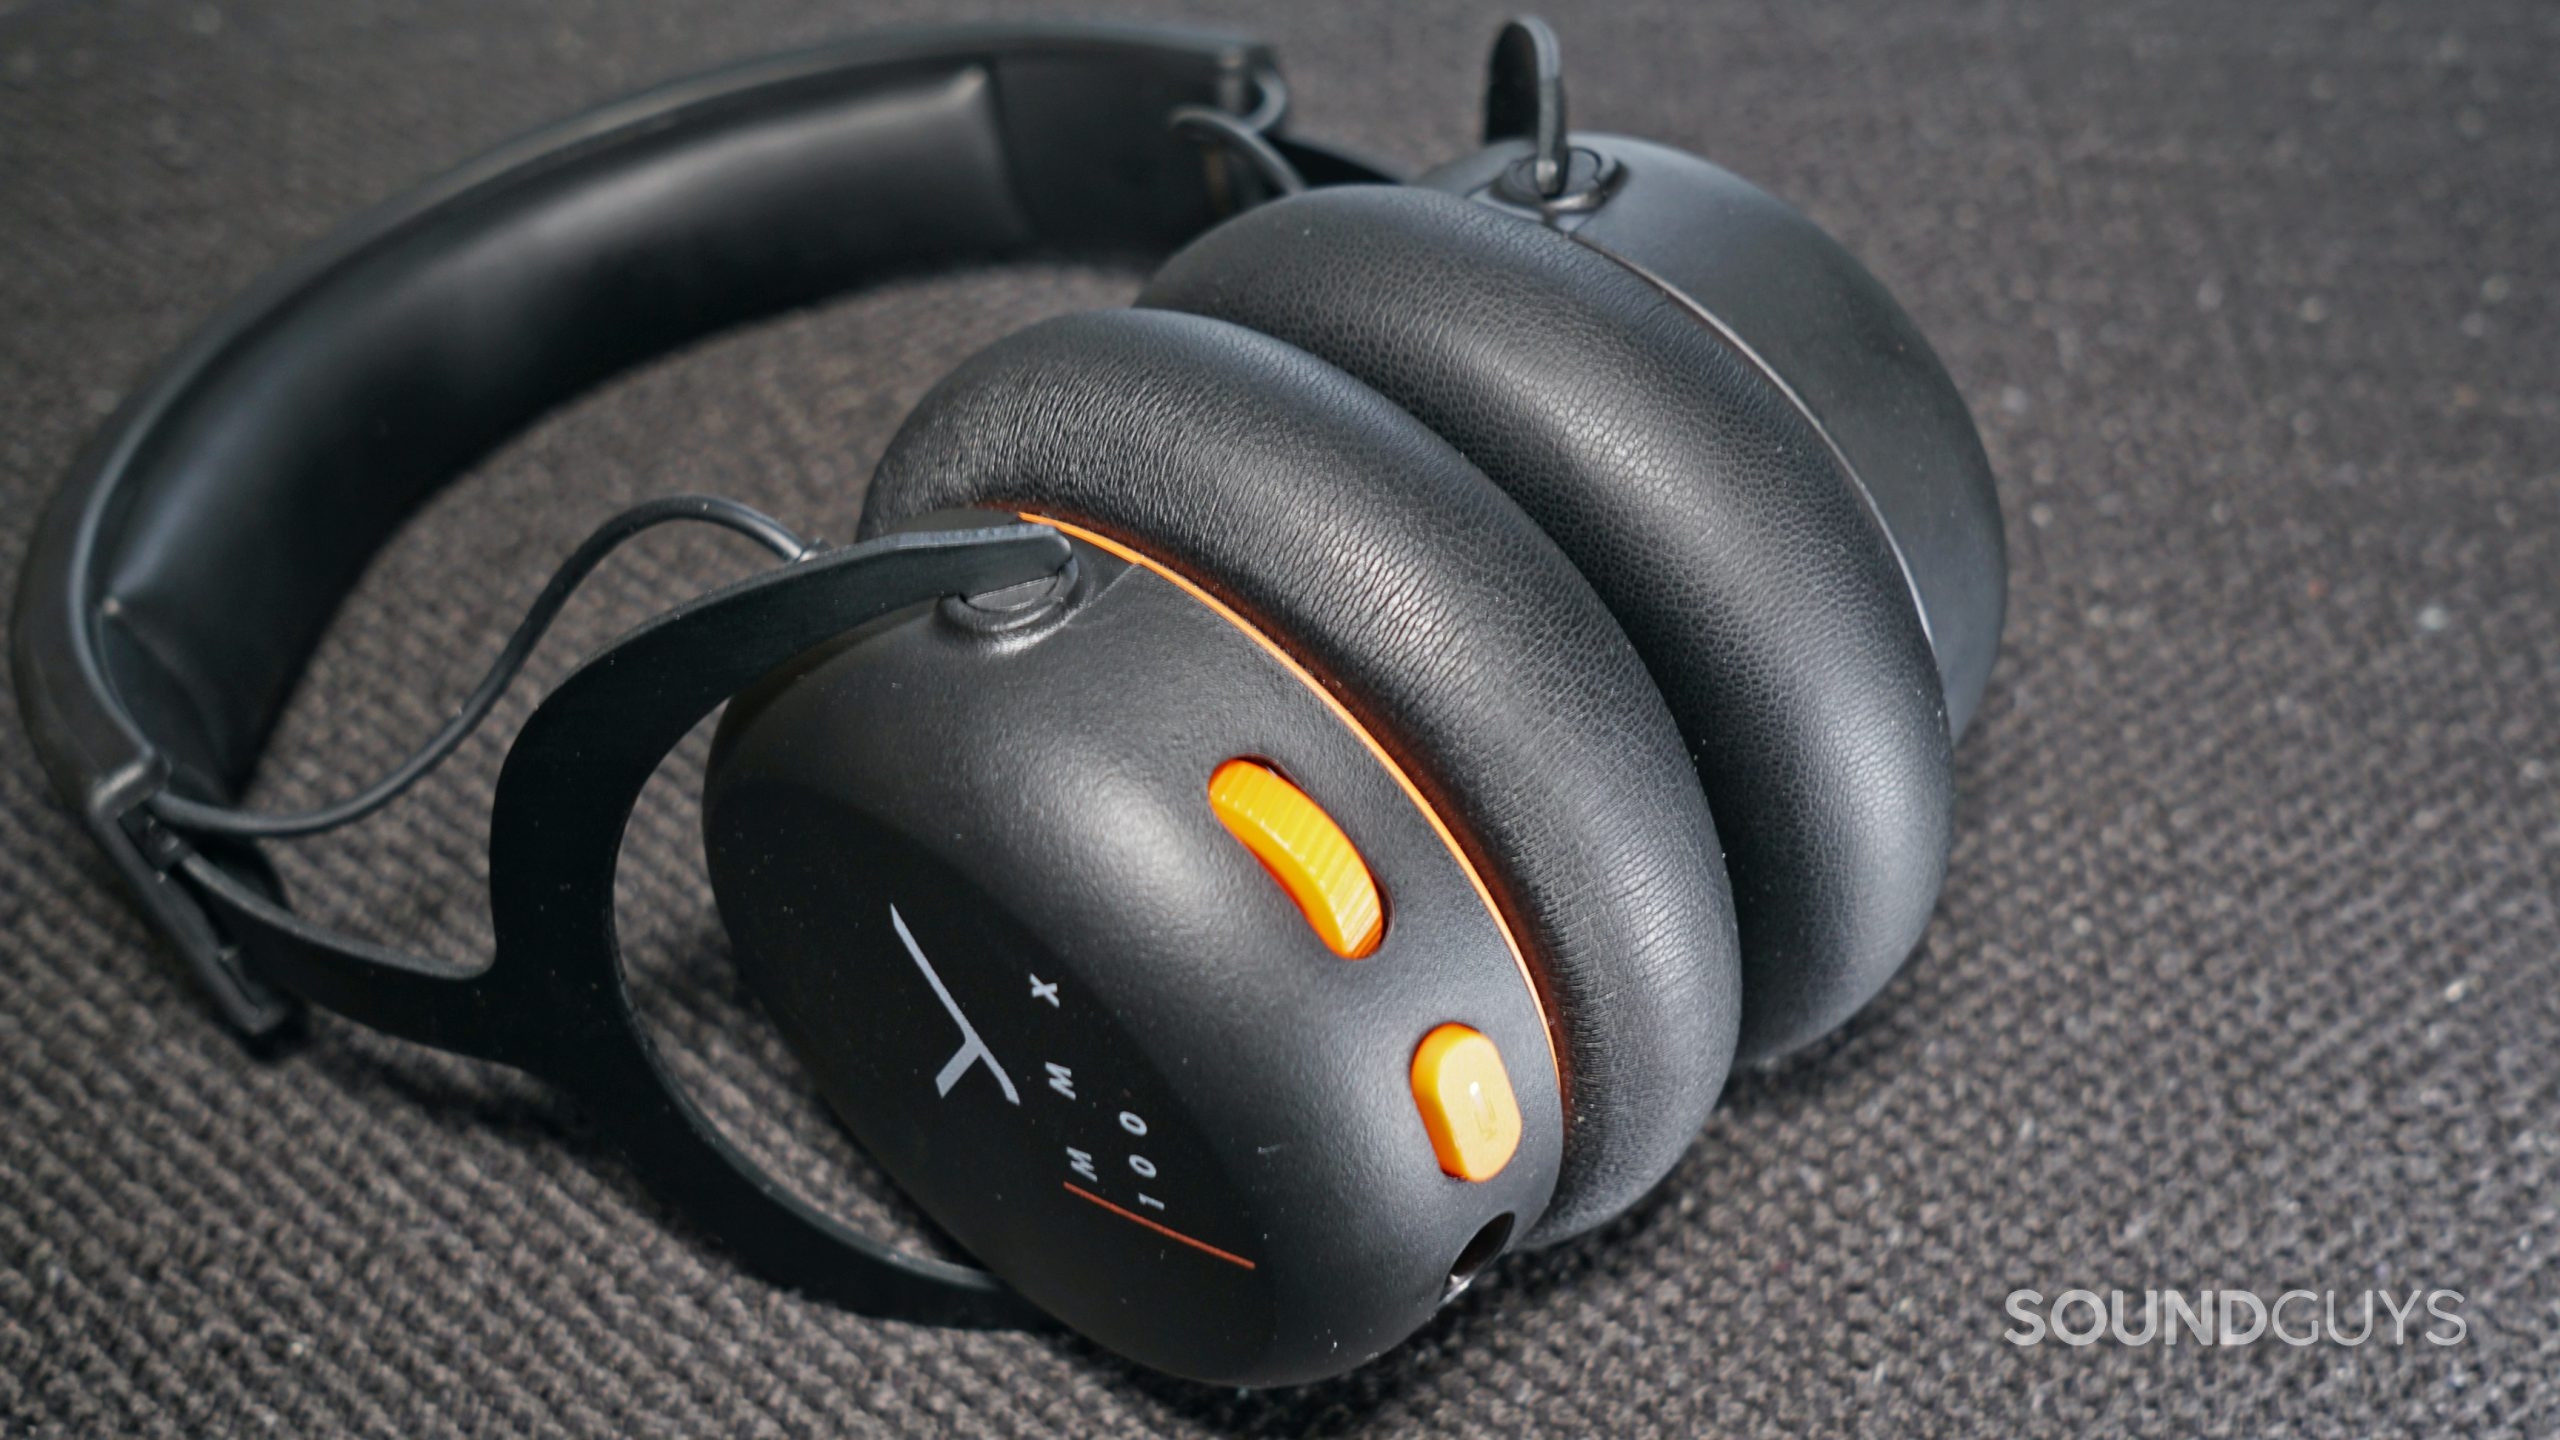 The Beyerdynamic MMX 100 gaming headset lays on a fabric surface with its volume dial and mute button in full view.